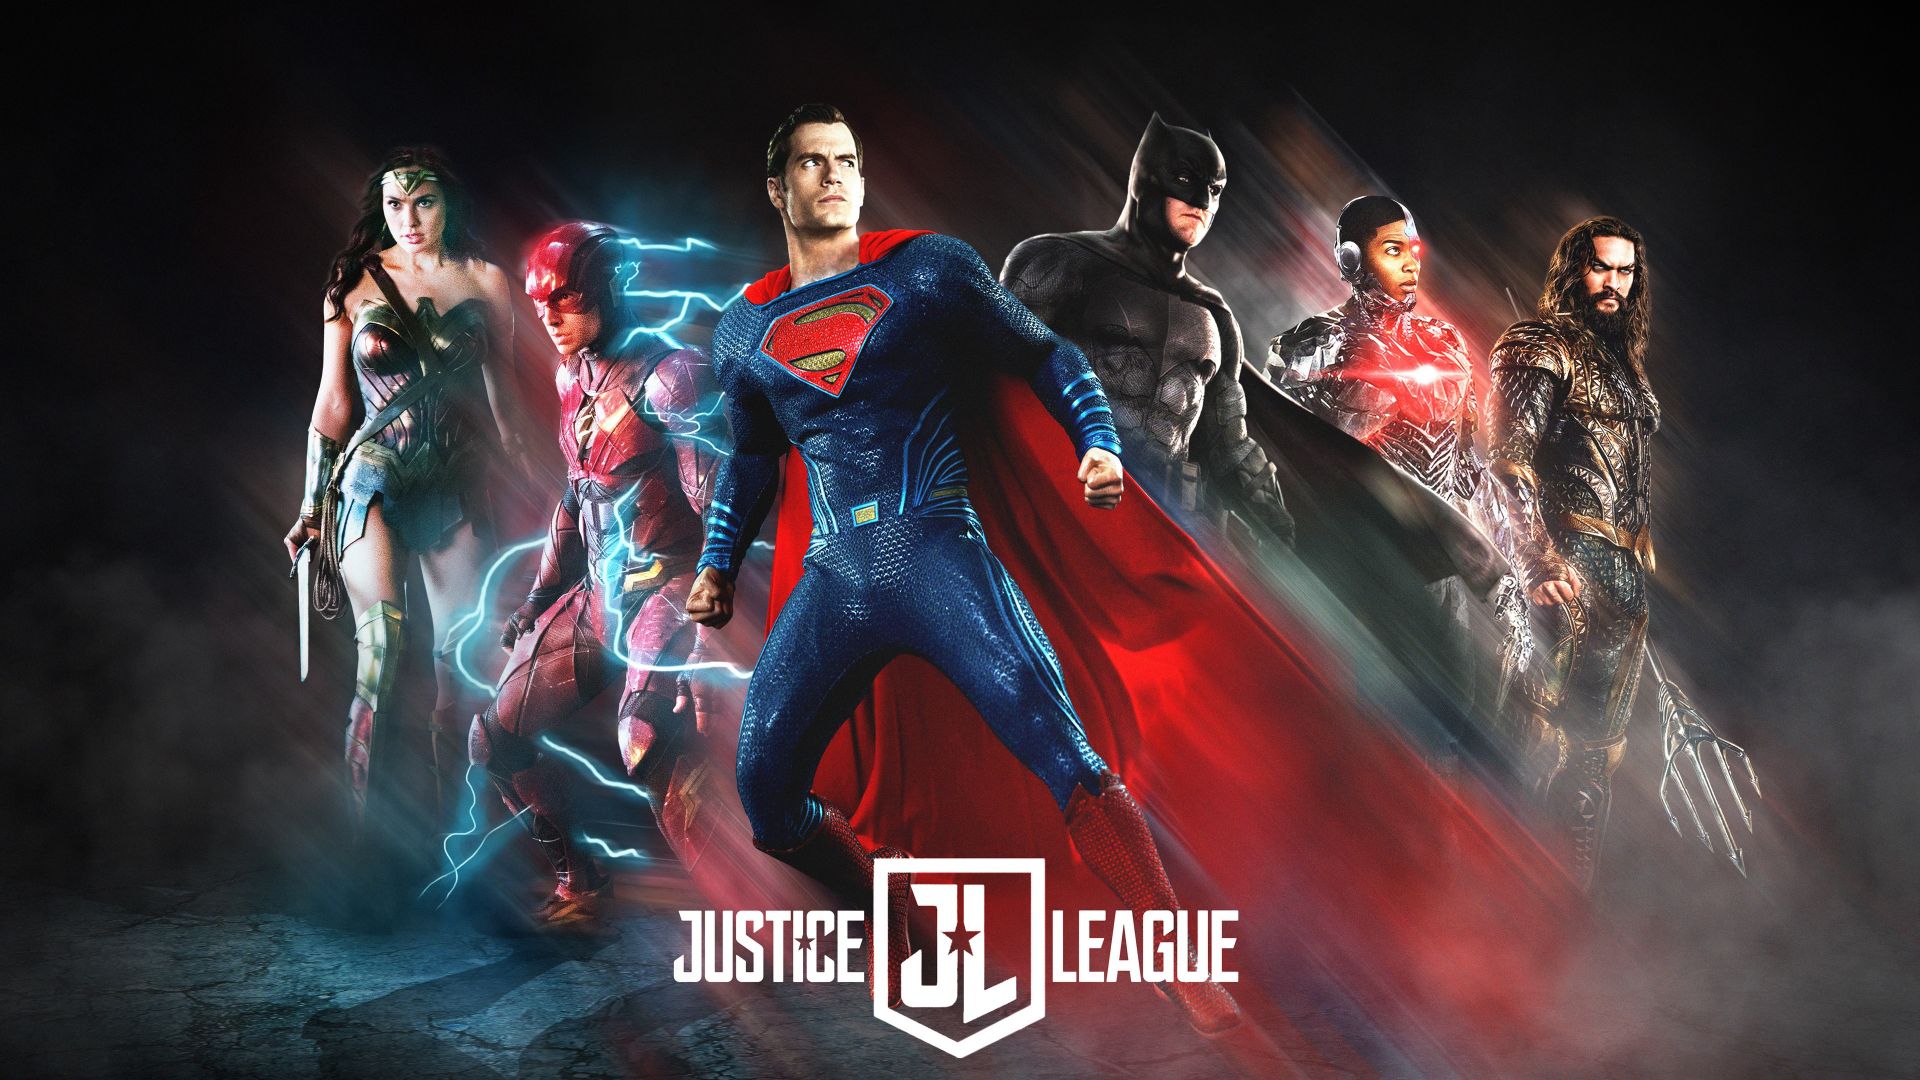 Justice League, all from DC films